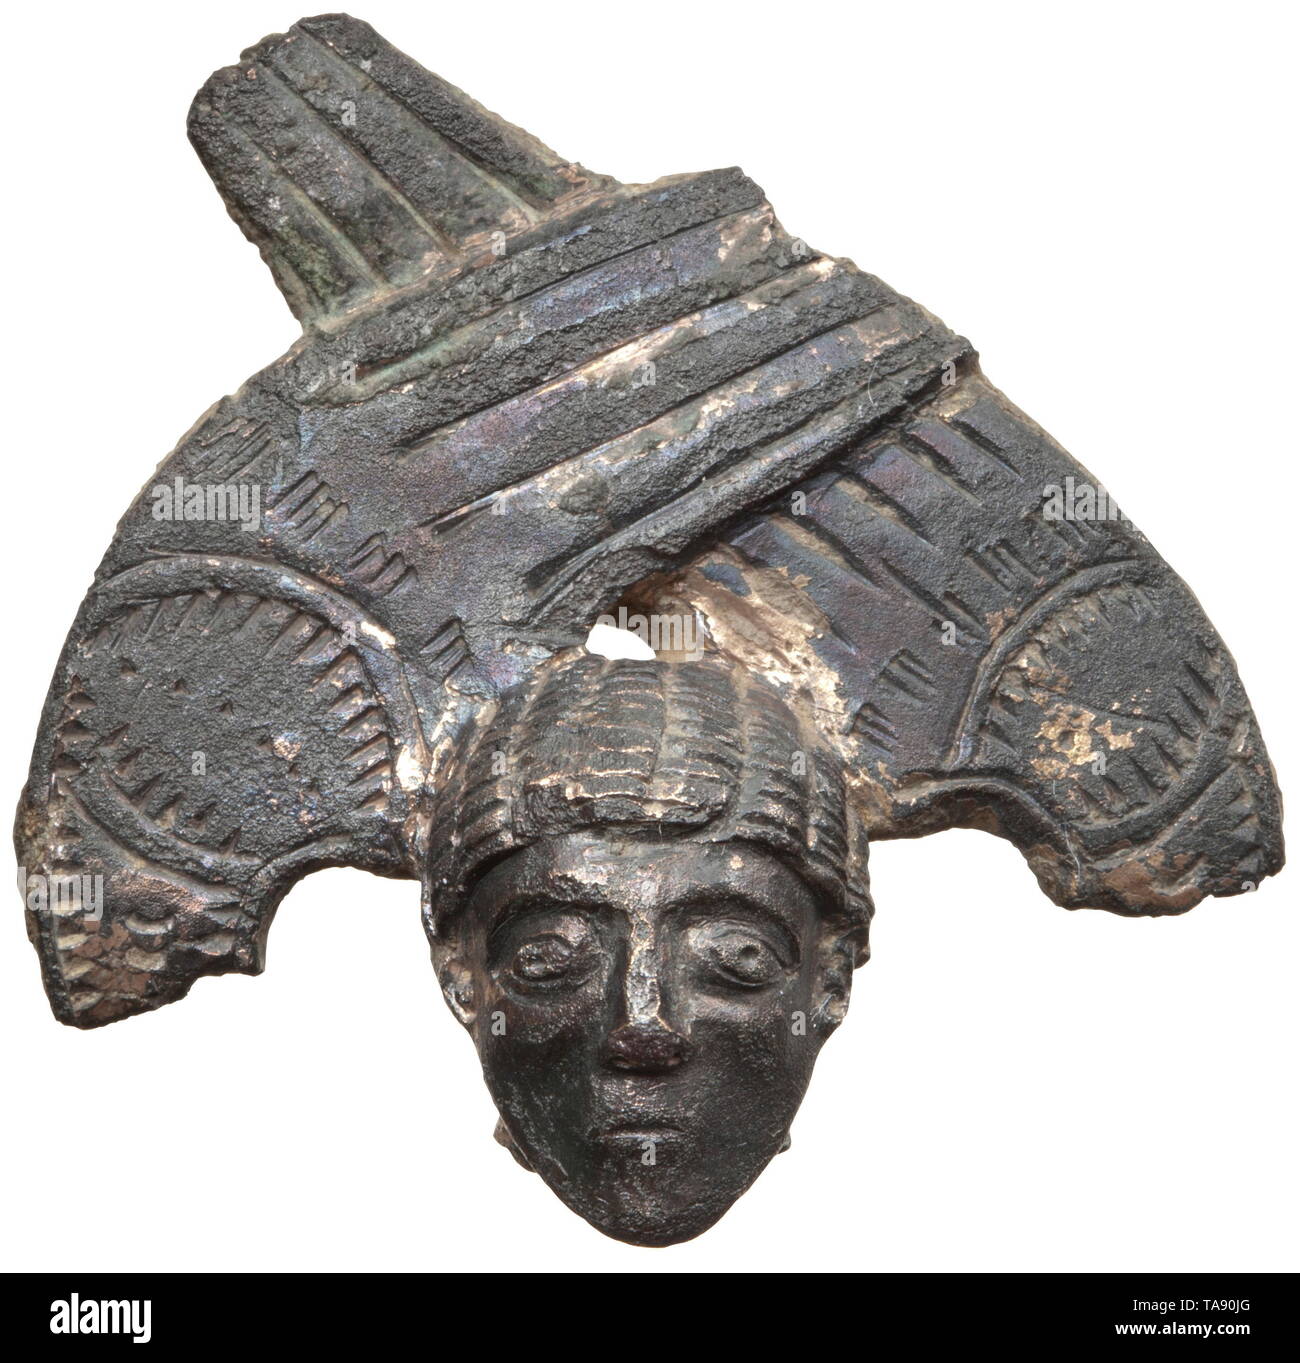 A bronze head of a seraph, middle byzantine, 9th - 11th century Head with well-ordered locks. Above this a crossed pair of wings in flight, at their centres an almond-shaped ornament (an eye?), the feathers finely wrought. Two further pairs of wings not preserved. The obverse and reverse are equally meticulously configured. A fragment with a liturgical purpose of surpassingly good quality. Dark brown patina with traces of gilding. Height 4.3 cm. Provenance: Viennese private collection, acquired in the 1990s through the arts trade. historic, histo, Additional-Rights-Clearance-Info-Not-Available Stock Photo